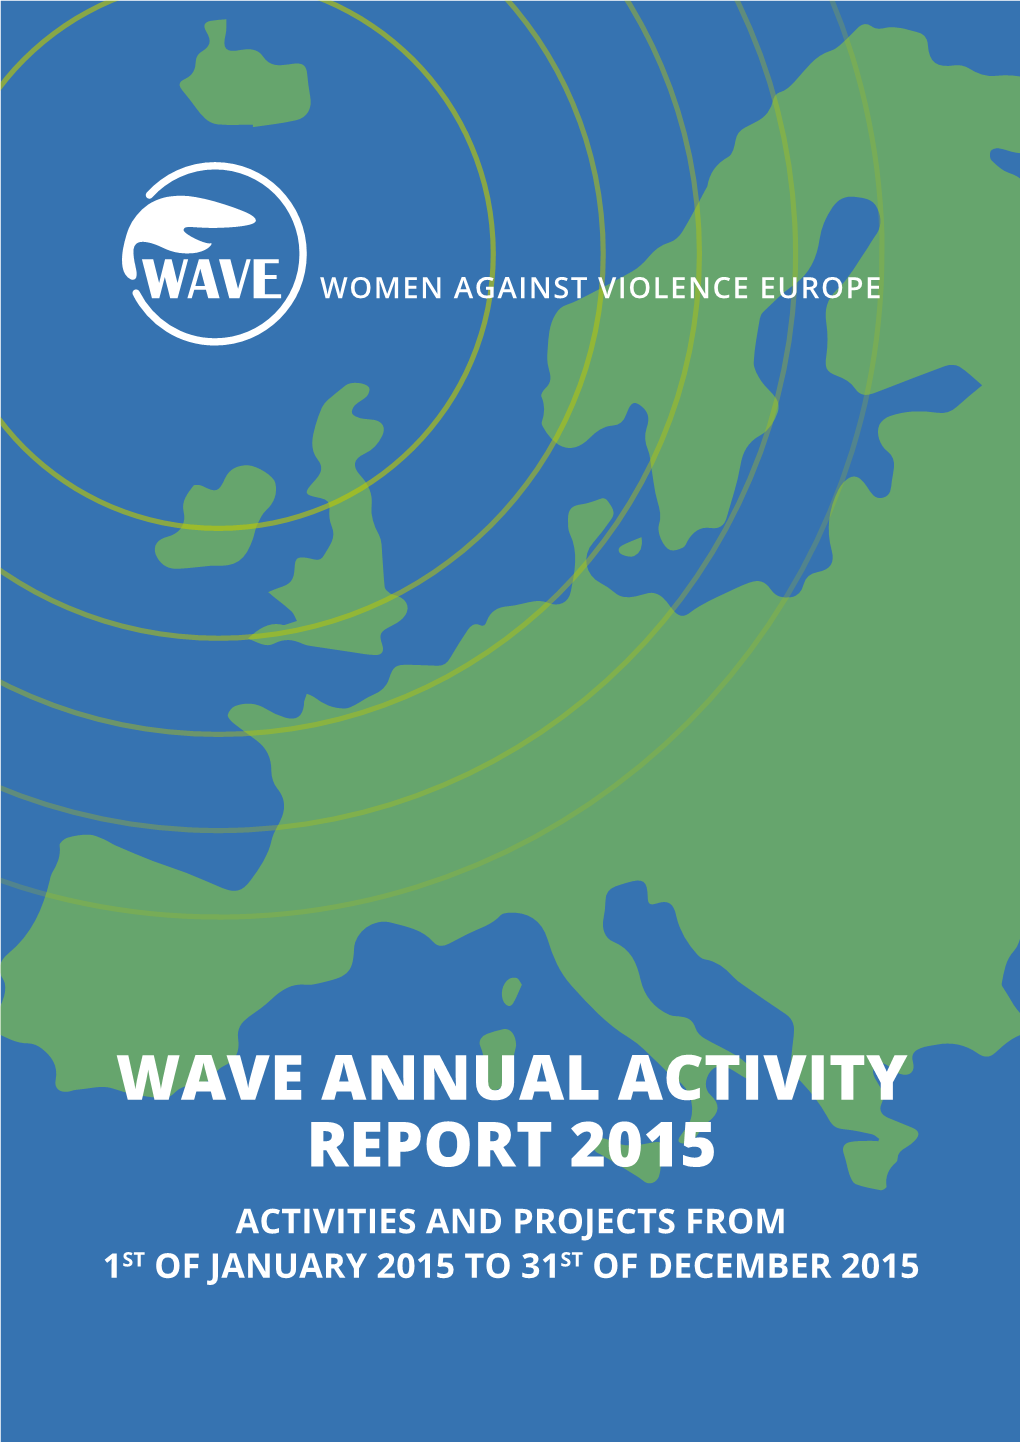 WAVE Annual Activity Report 2015 Activities and Projects from 1St of January 2015 to 31St of December 2015 WAVE ANNUAL ACTIVITY REPORT 2015